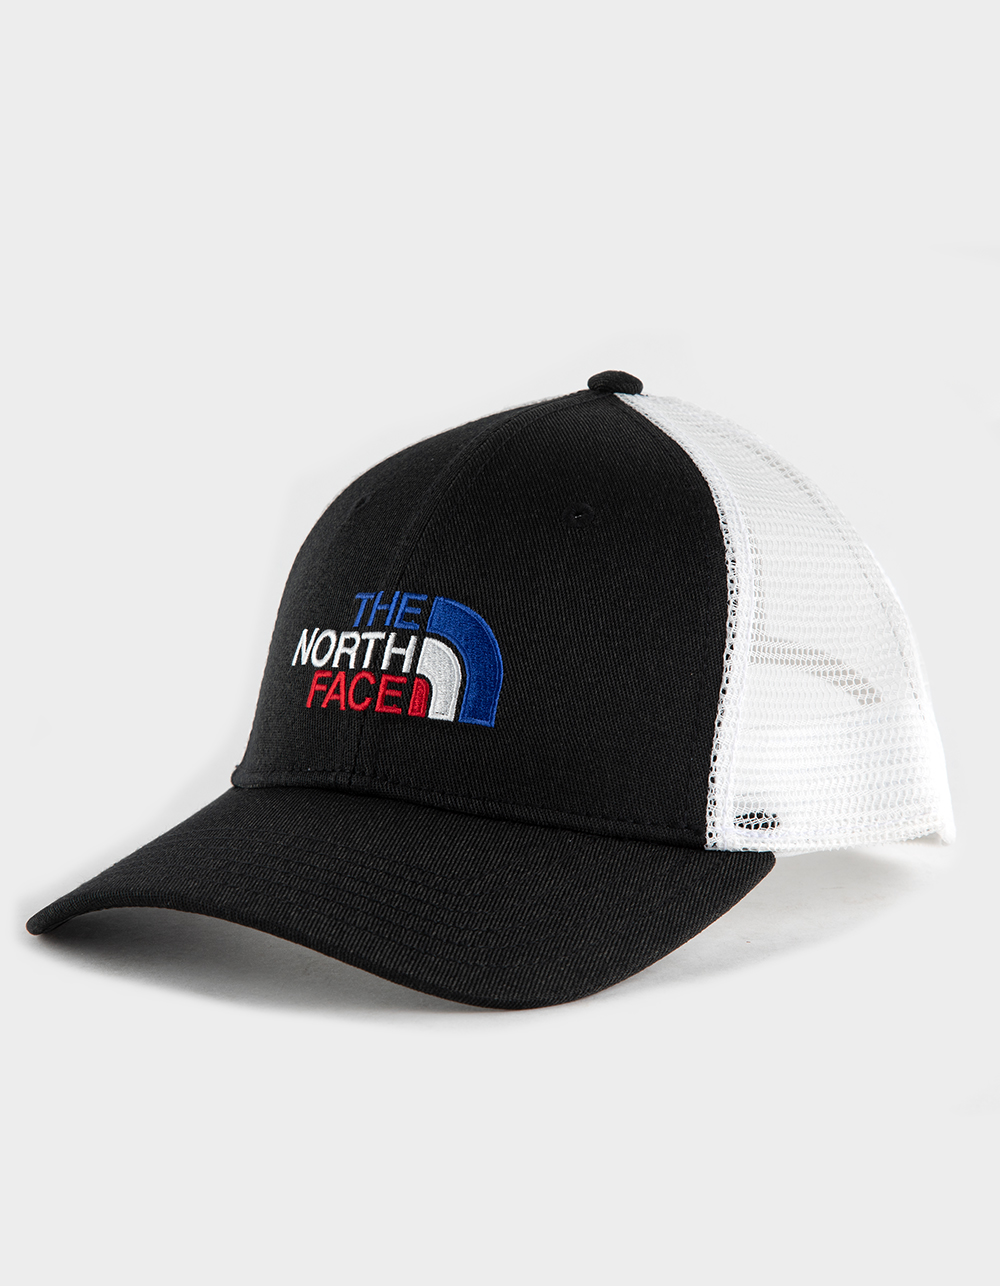 THE NORTH FACE Mudder Mens Trucker Hat - RED/WHT/BLUE